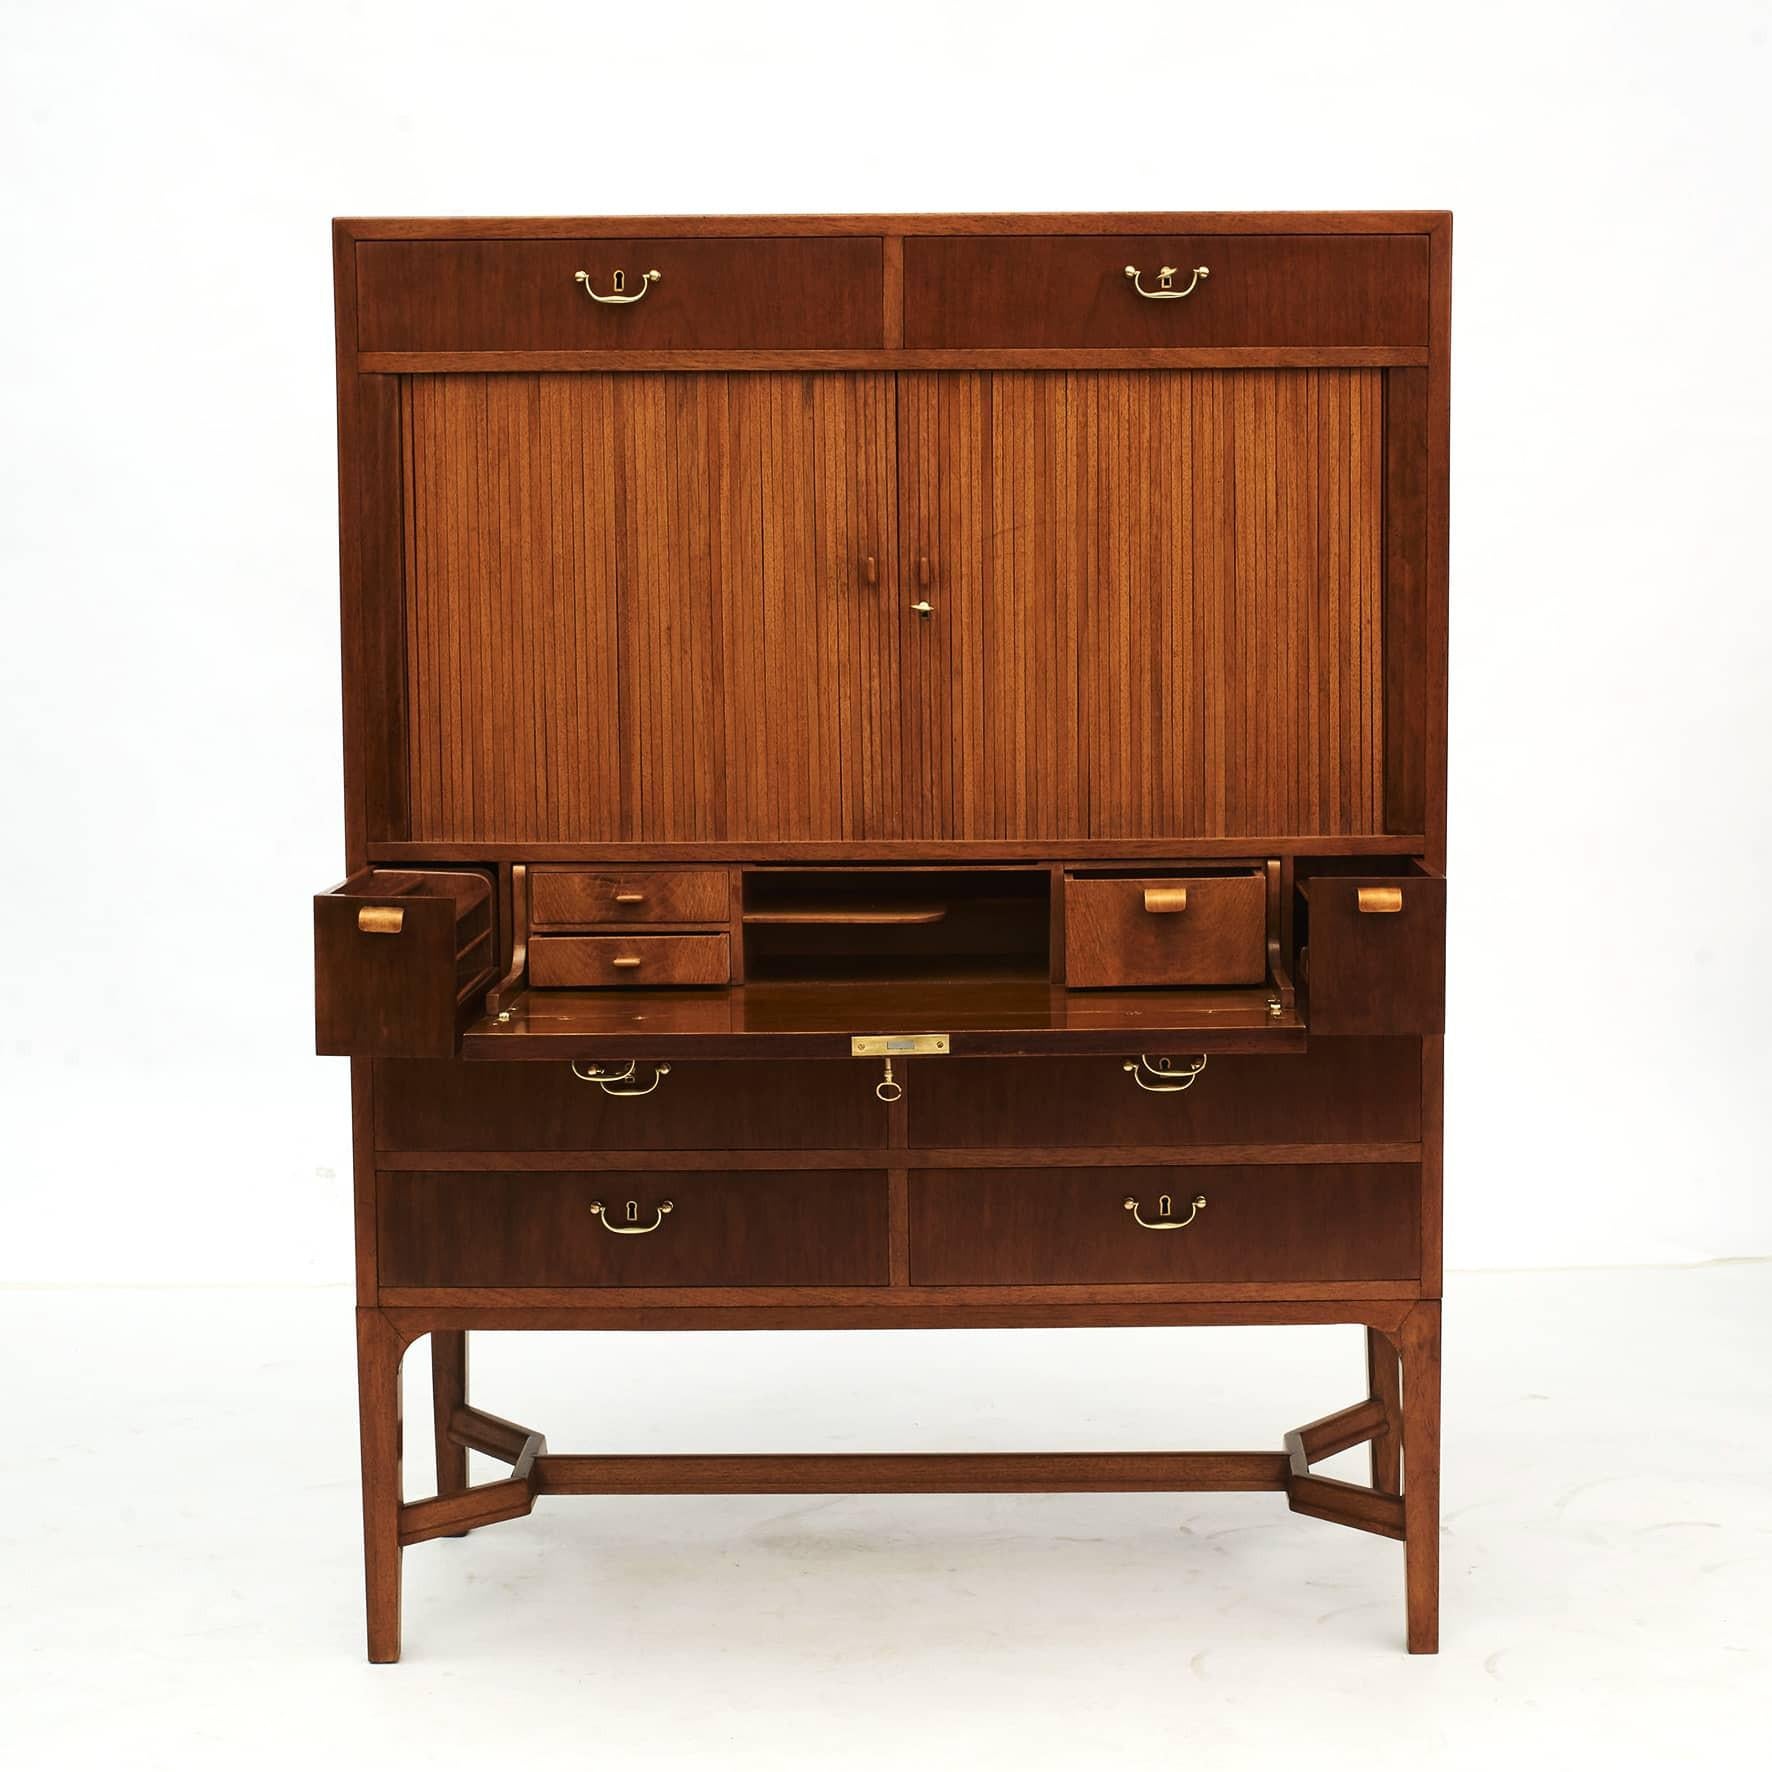 Made in the 1950s by Danish cabinetmaker this unique custom-made cabinet features double tambour doors with interior shelves, drawers and a fold-out writing plate, great for a laptop.
Crafted in light and dark mahogany. Interior made in maple.
A